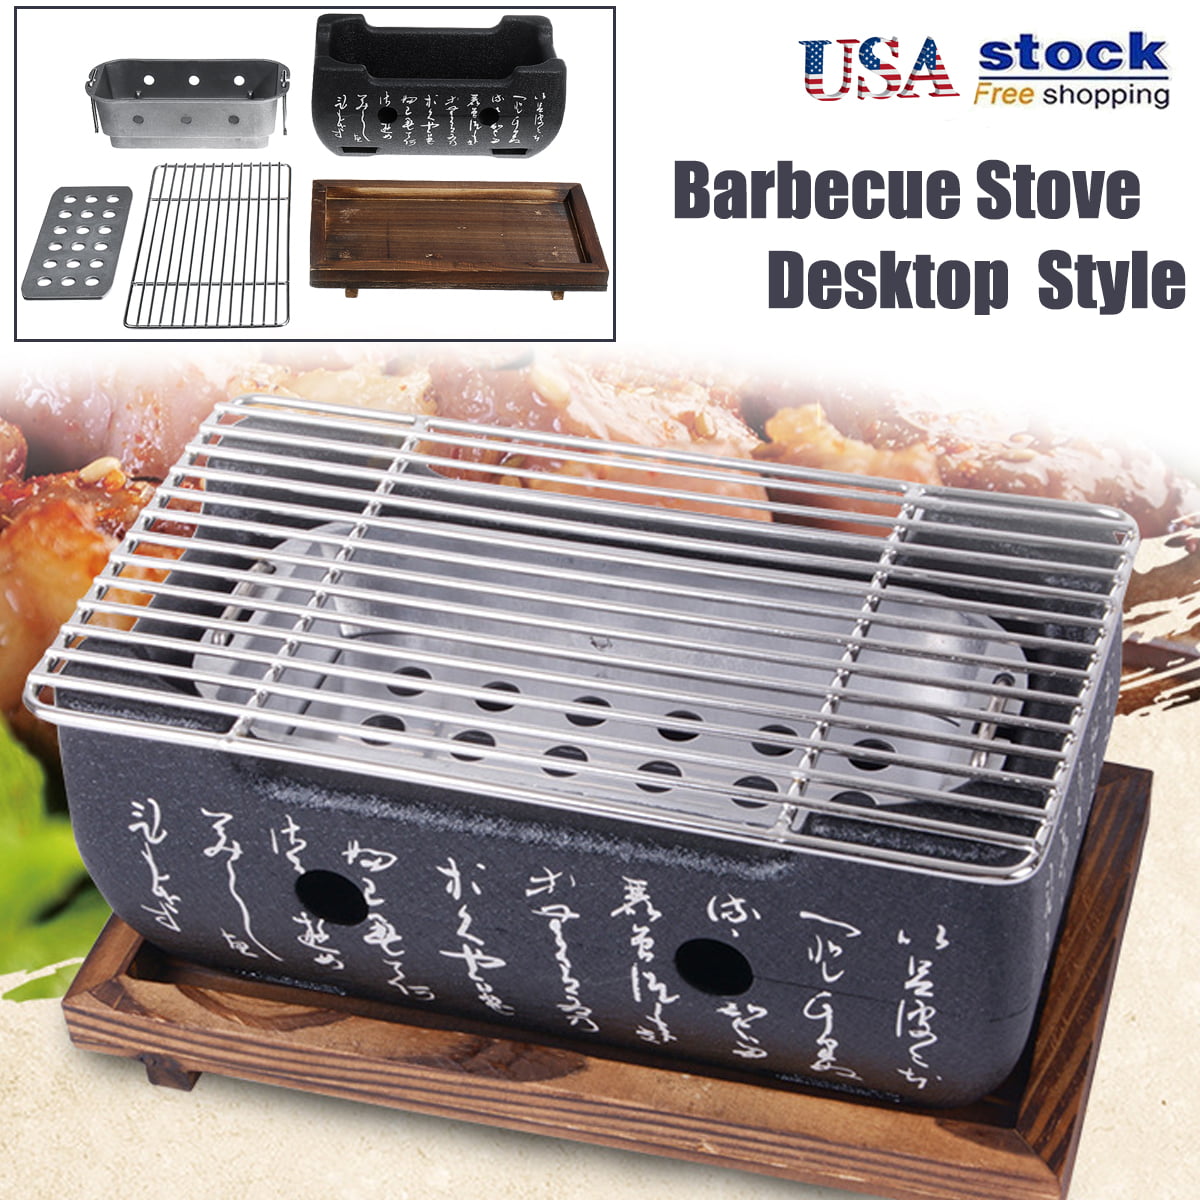 Portable Grill,Camping Grill,Portable Charcoal Grill,Aluminum Alloy Hibachi Grill,Japanese BBQ Grill,Indoor Grill,with Wood Tray,with Grill Mesh,for Yakiniku Yakitori and BBQ BBQ Grill,Size:S 